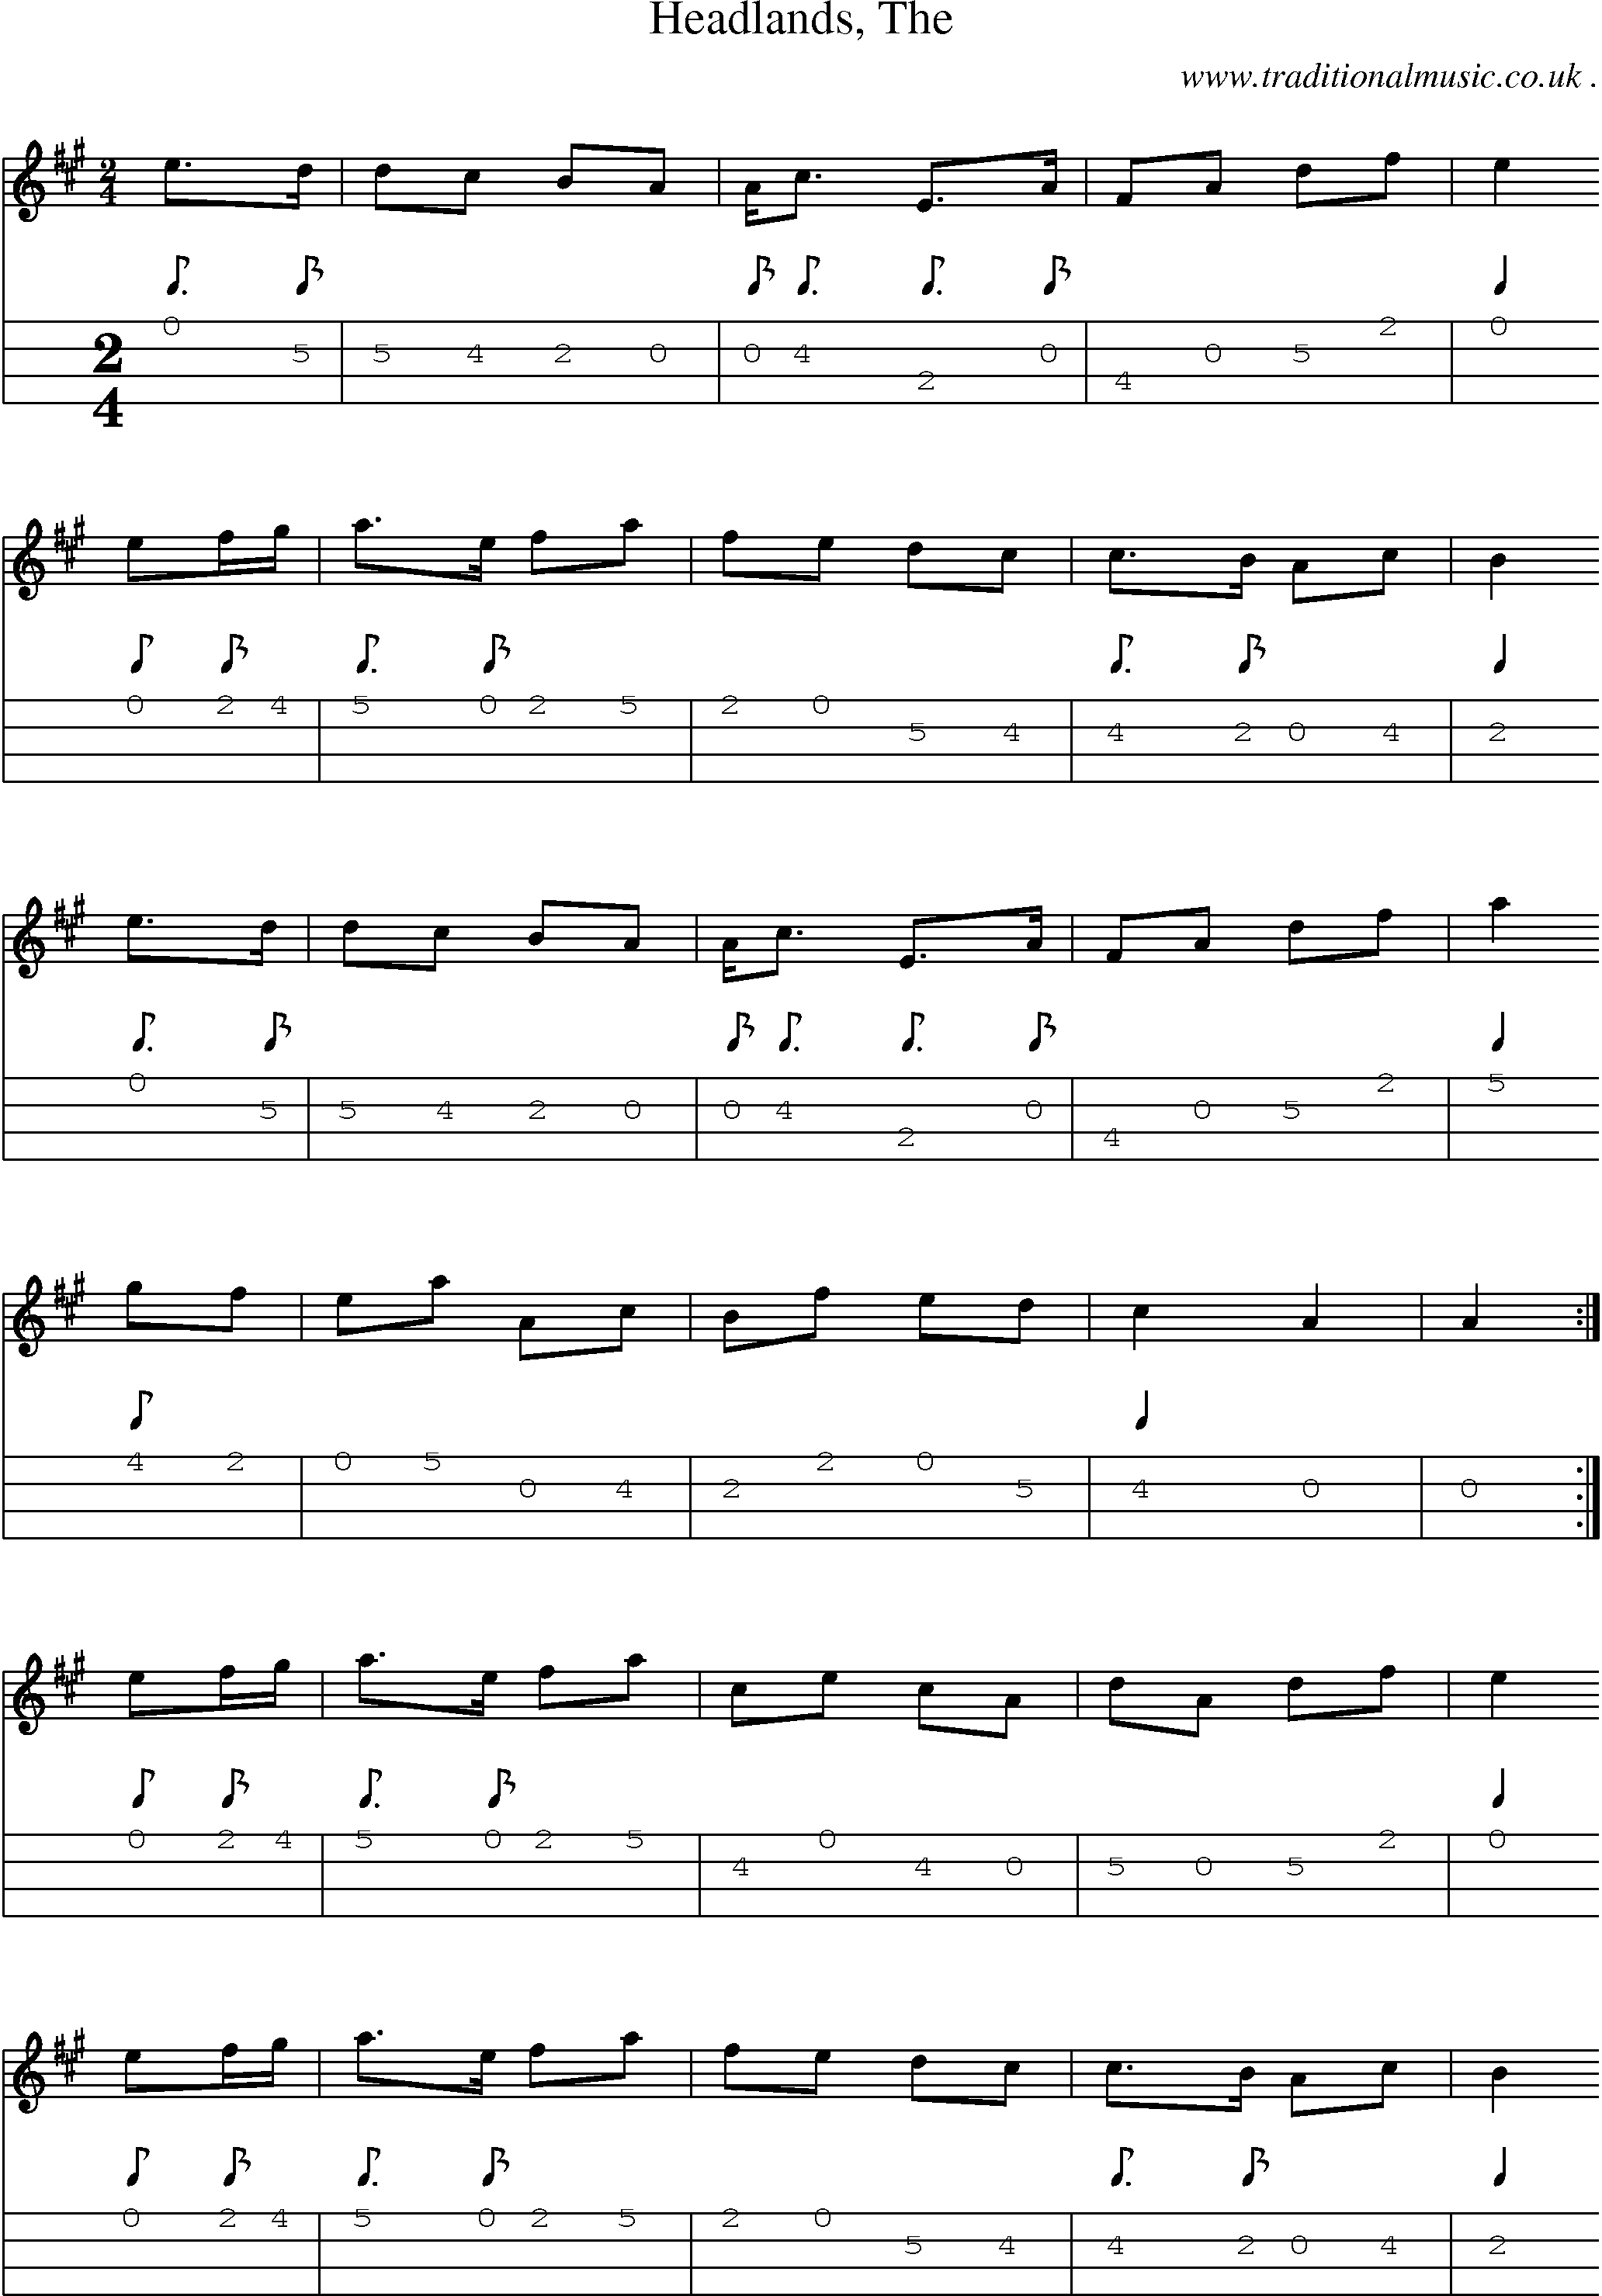 Sheet-music  score, Chords and Mandolin Tabs for Headlands The